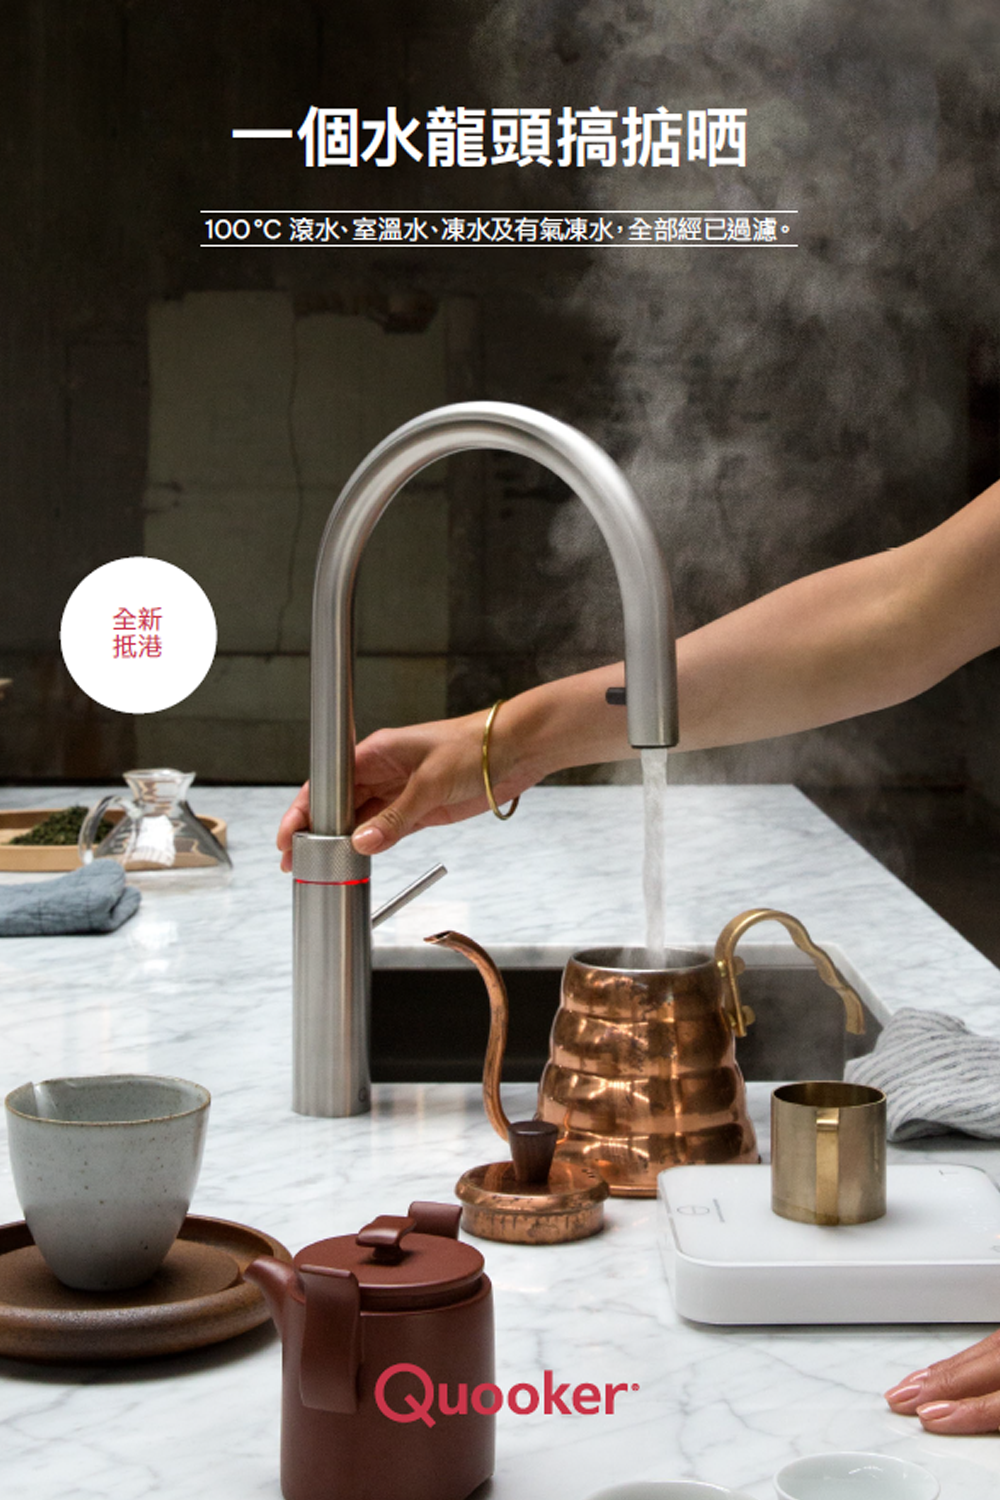 【QUOOKER】NORDIC ROUND 滾水水龍頭 Single Tap  Instant Hot /or Warm /or Chilled /or Sparkling Water Tap | From Netherlands |